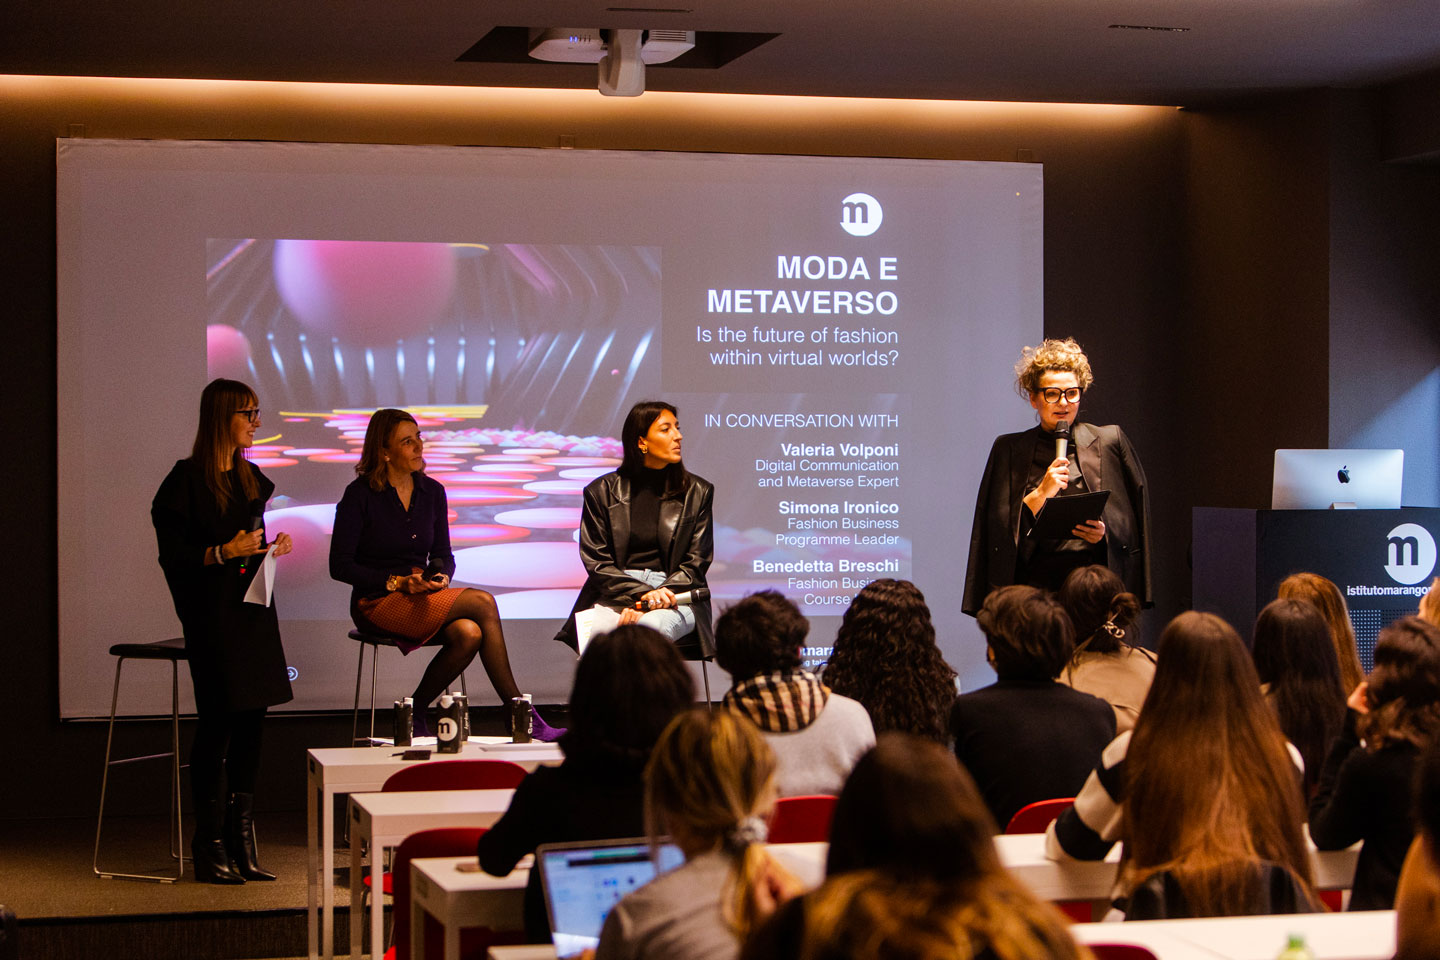 Journalist and Digital Fashion and Social Media Marketing tutor at Istituto Marangoni Milano, Valeria Volponi met the fashion school’s students to discuss the first book she wrote